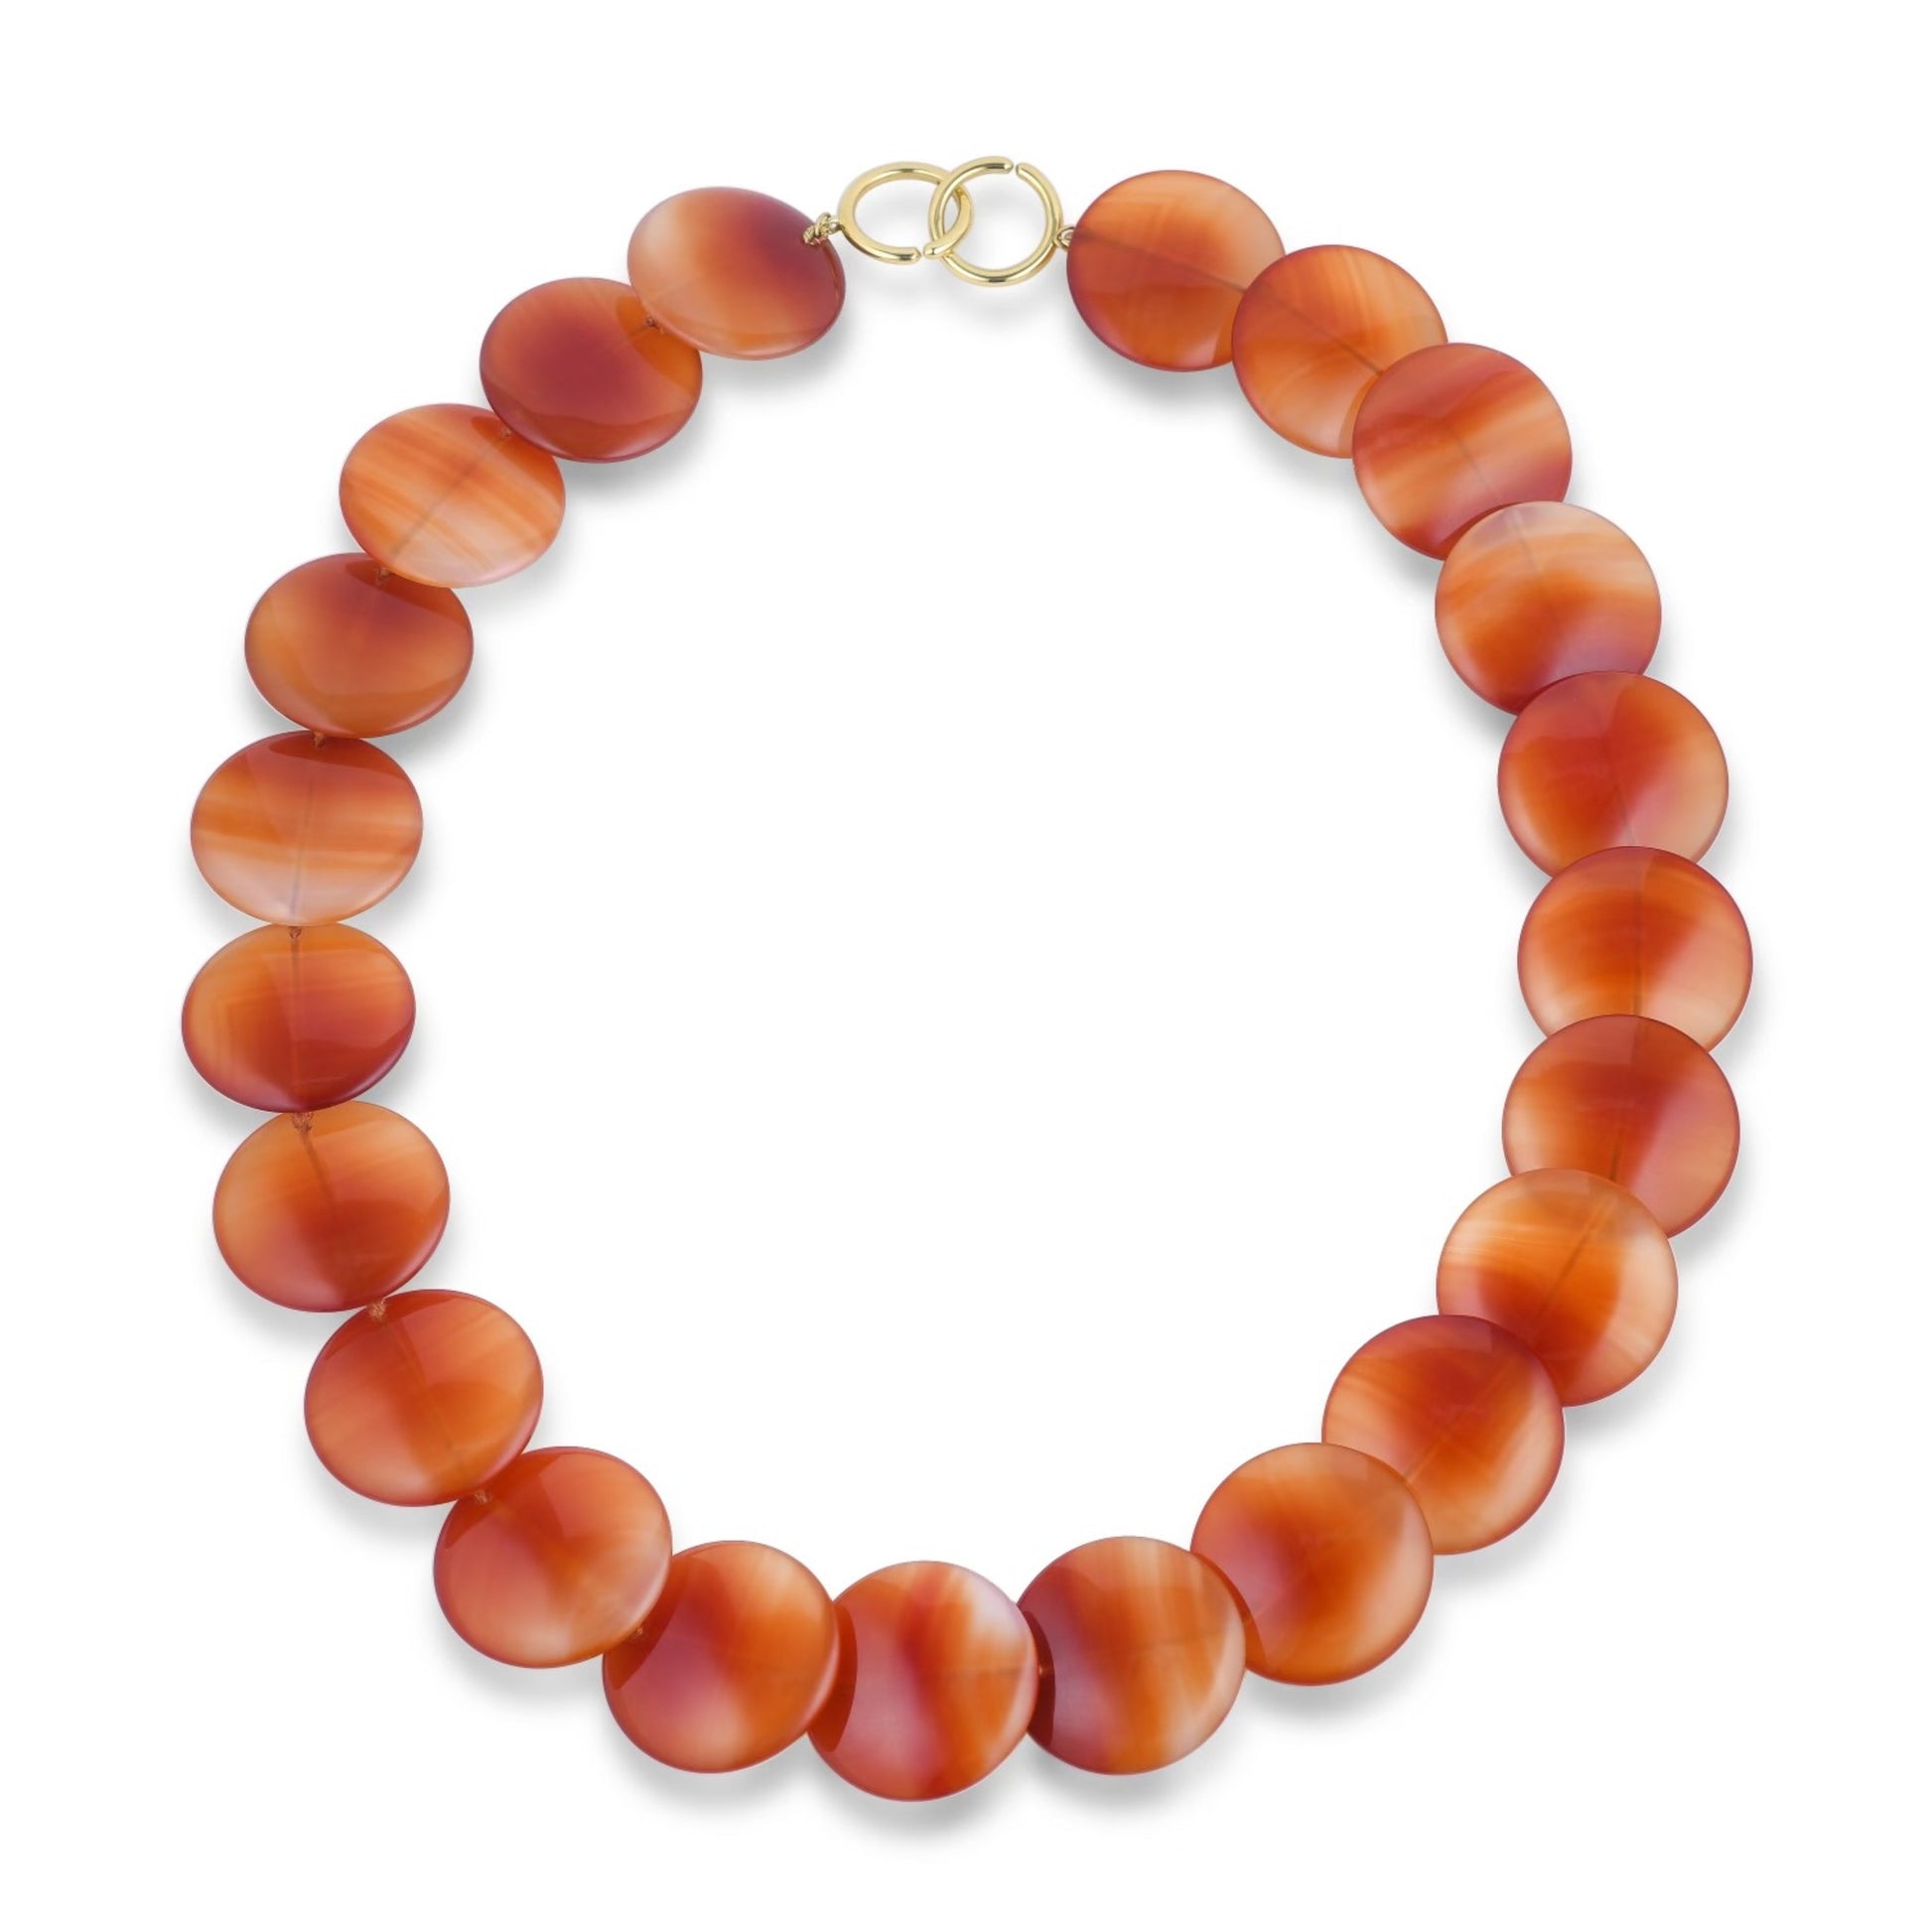 Tiffany & Co. Post-1980s 18KT Yellow Gold Carnelian Agate Necklace front